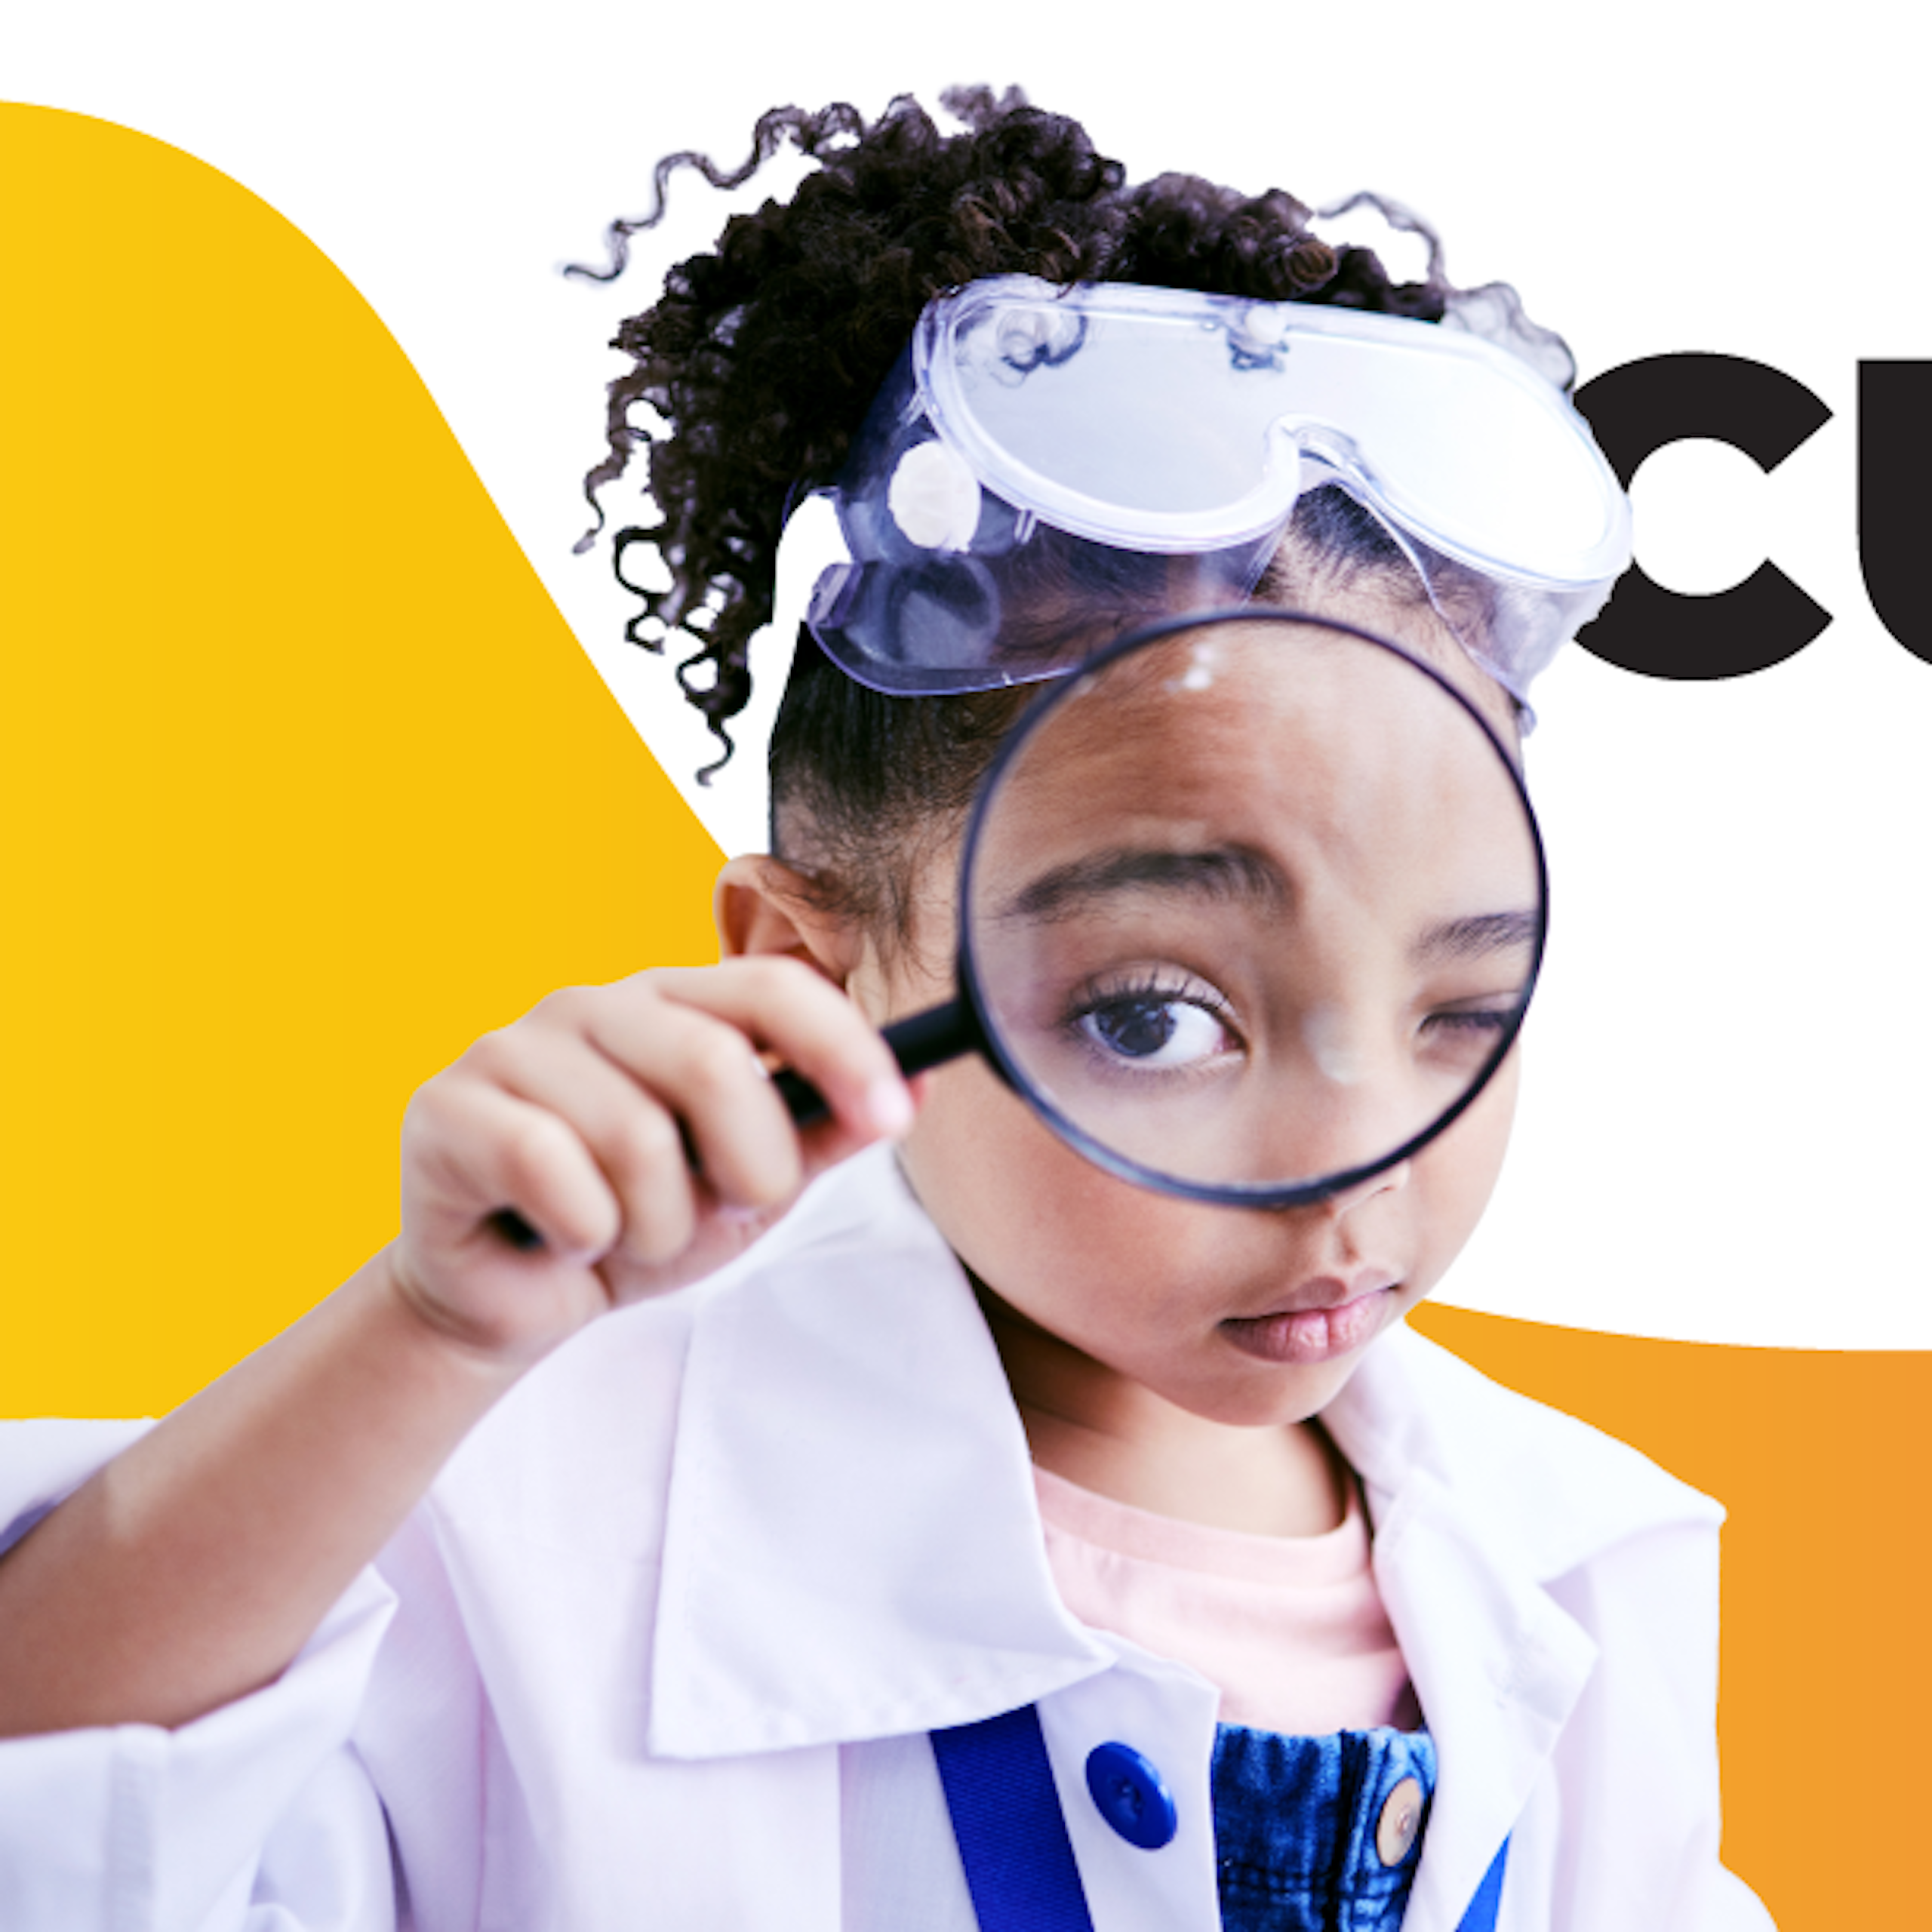 Banner for The Conversation's Curious Kids podcast